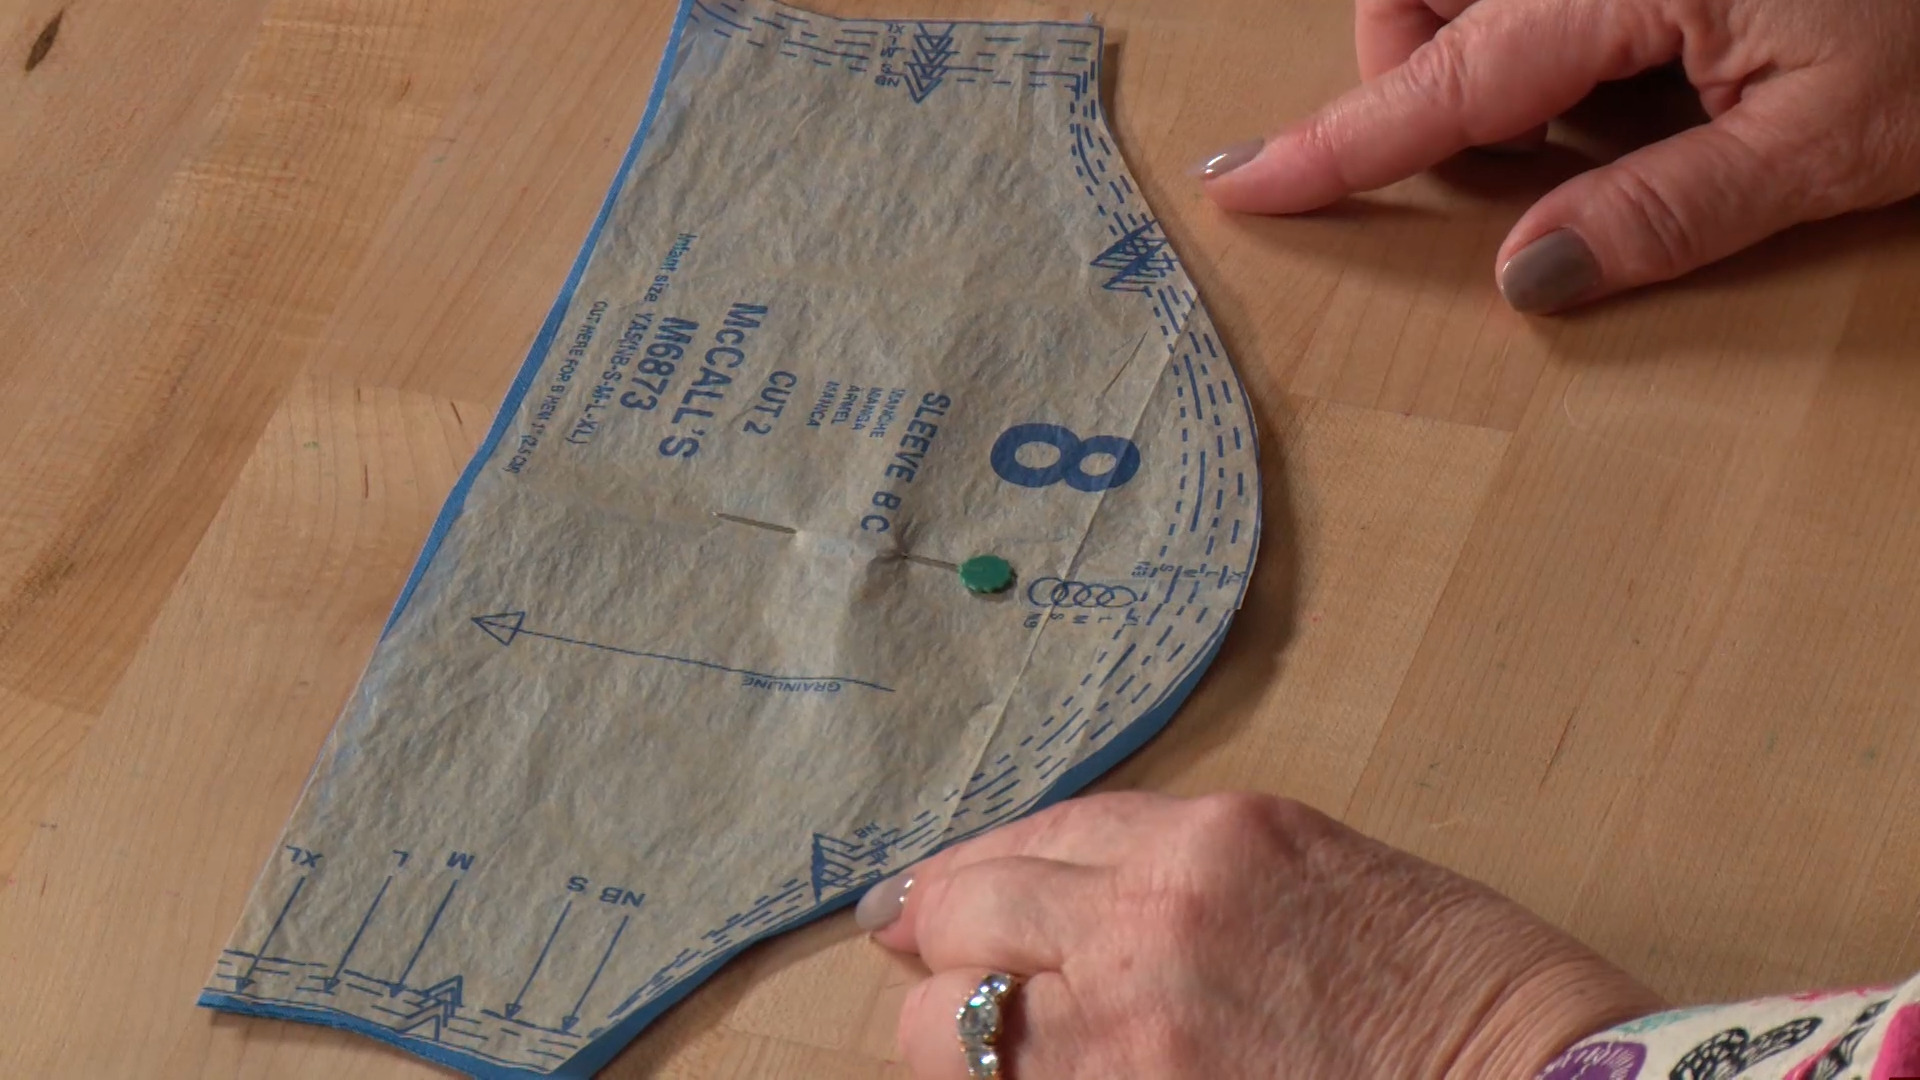 Master the Art of Fabric Marking for Perfect Sewing